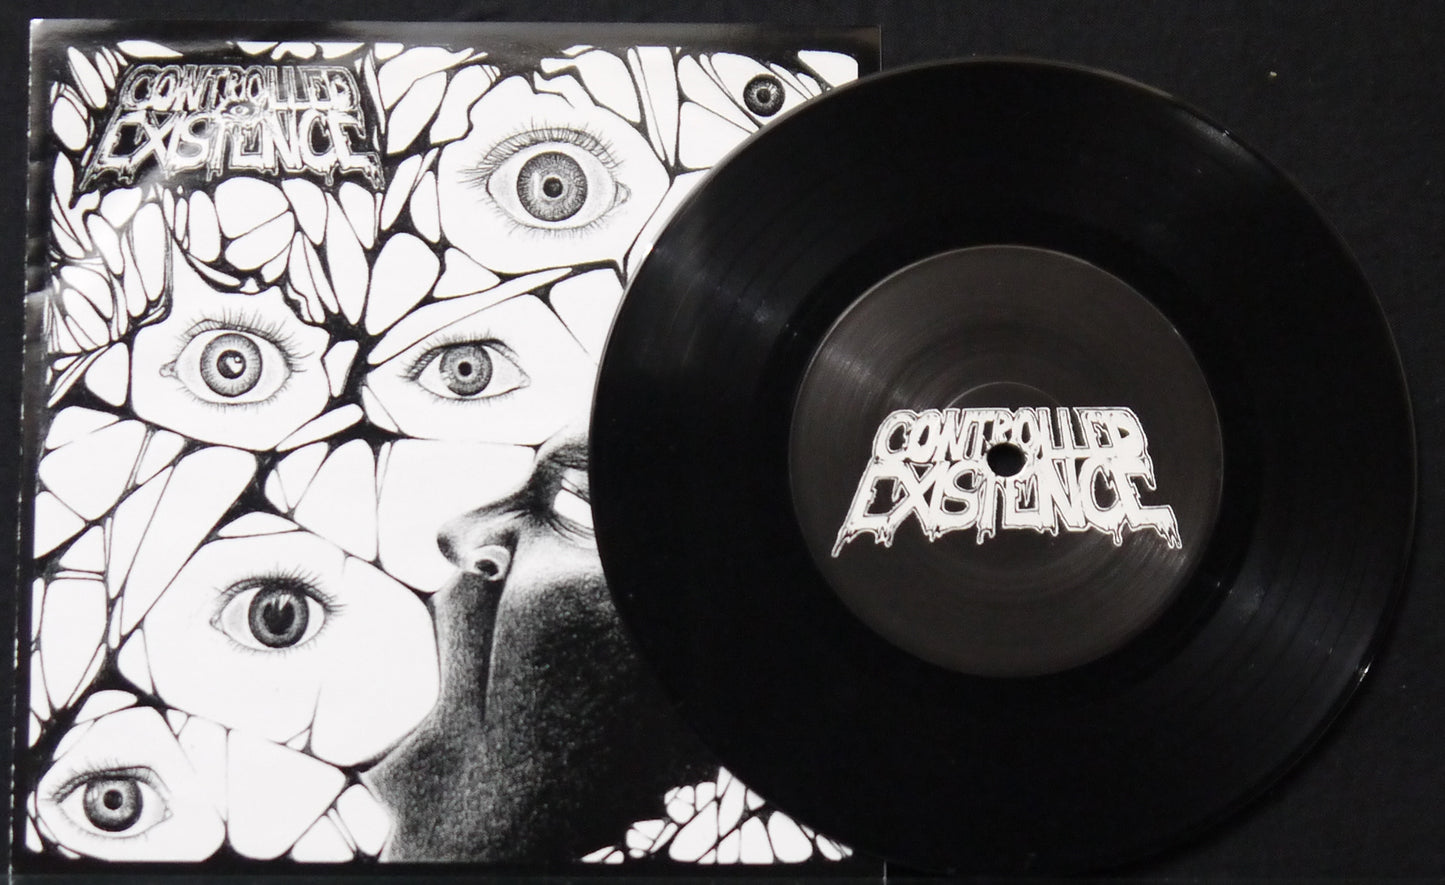 CONTROLLED EXISTENCE / DAYS OF DESOLATION - Split 7"